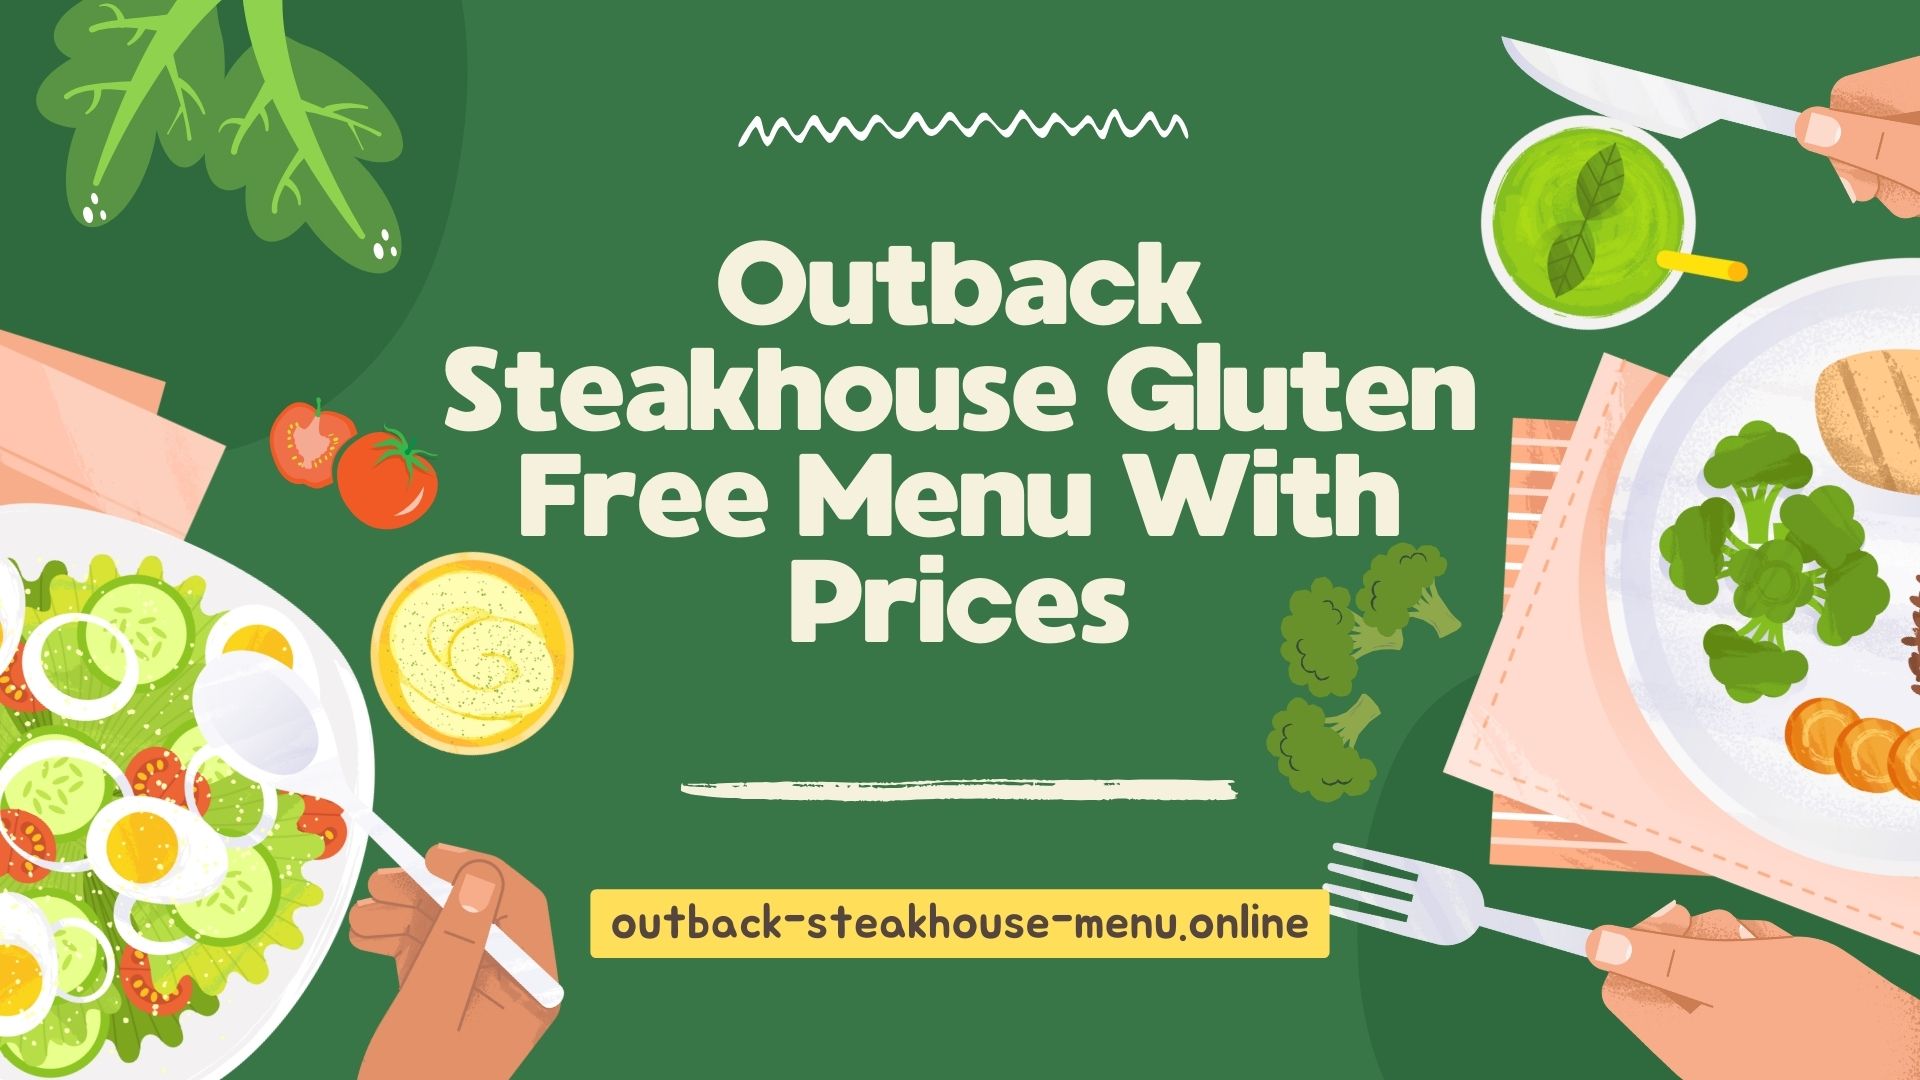 Outback Steakhouse Gluten Free Menu With Prices